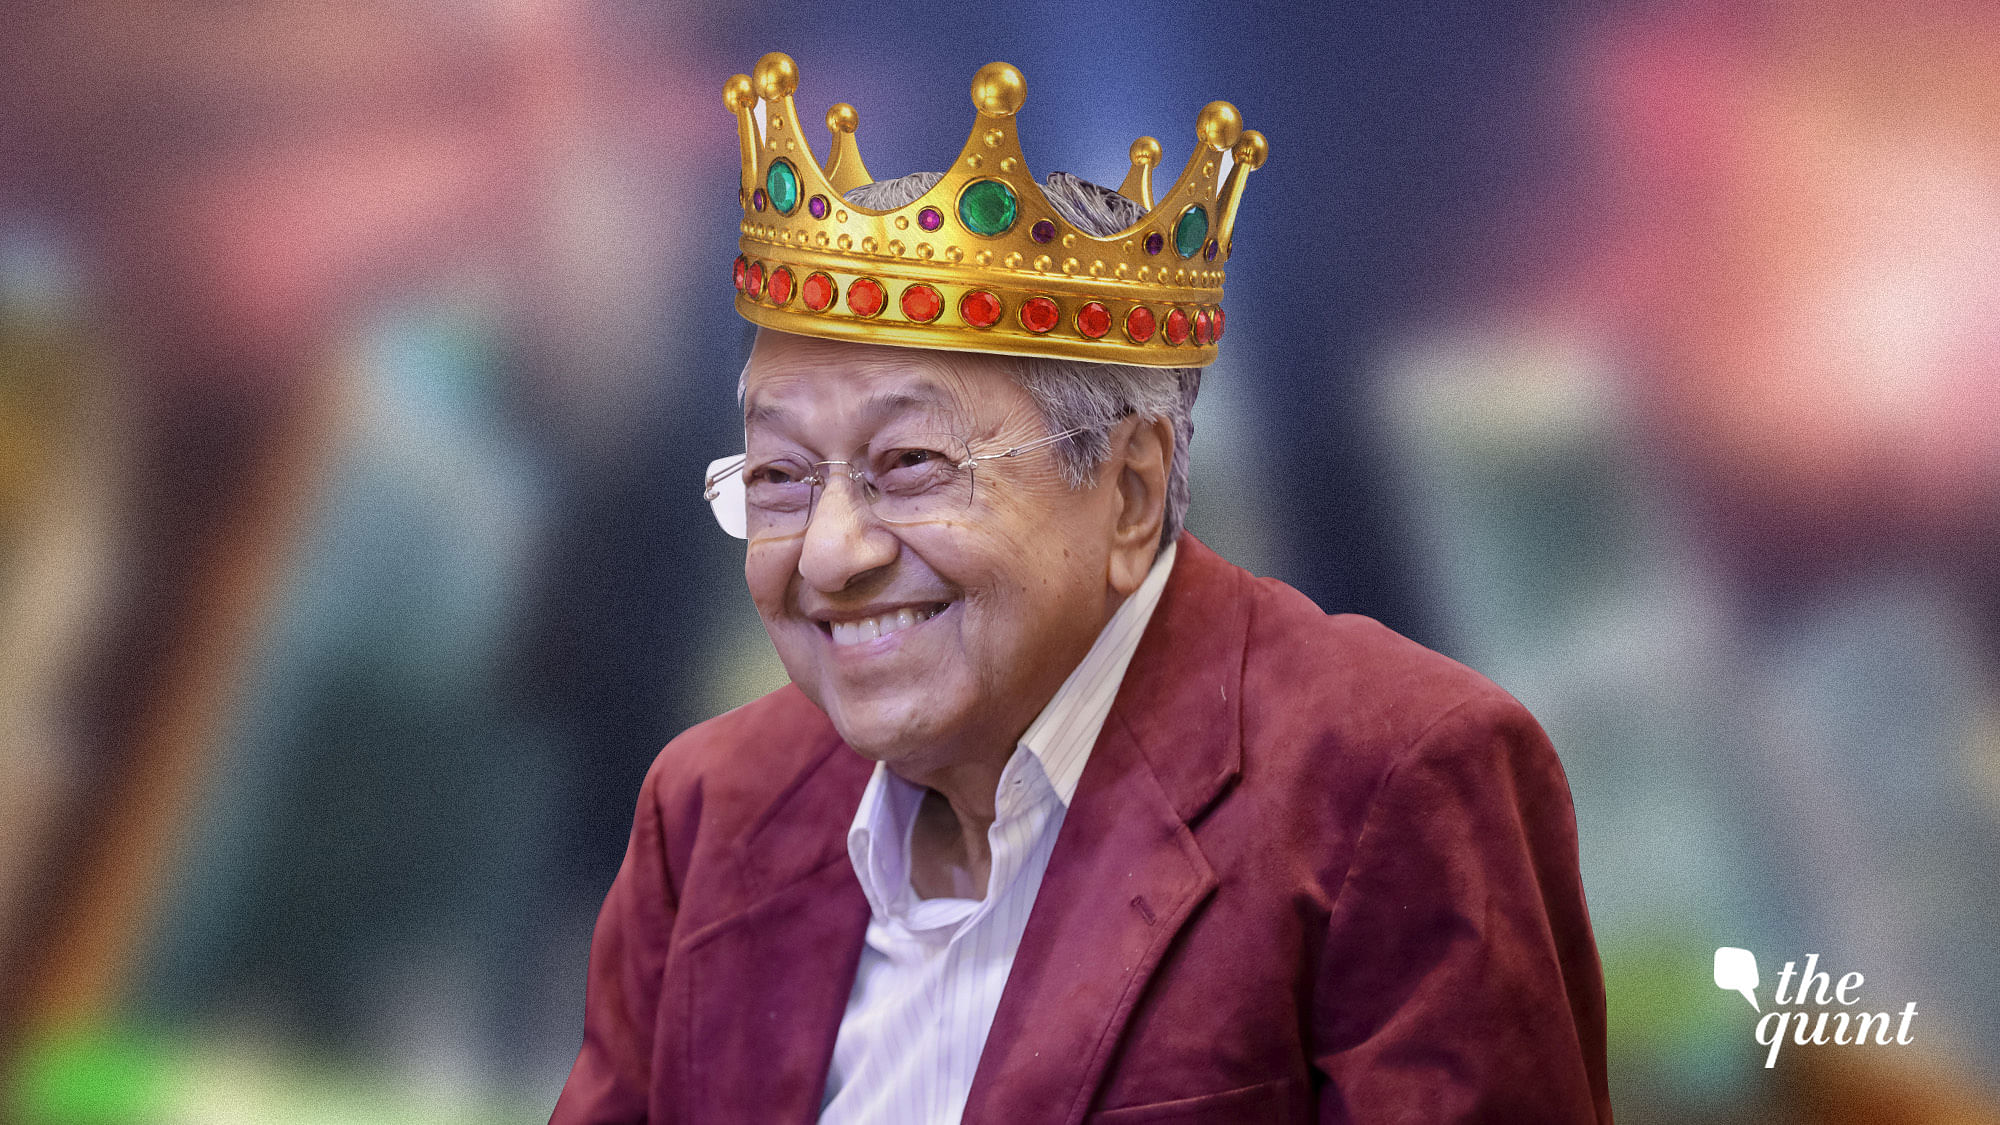 92-year-old Mahathir Mohammed is now the world’s oldest leader.